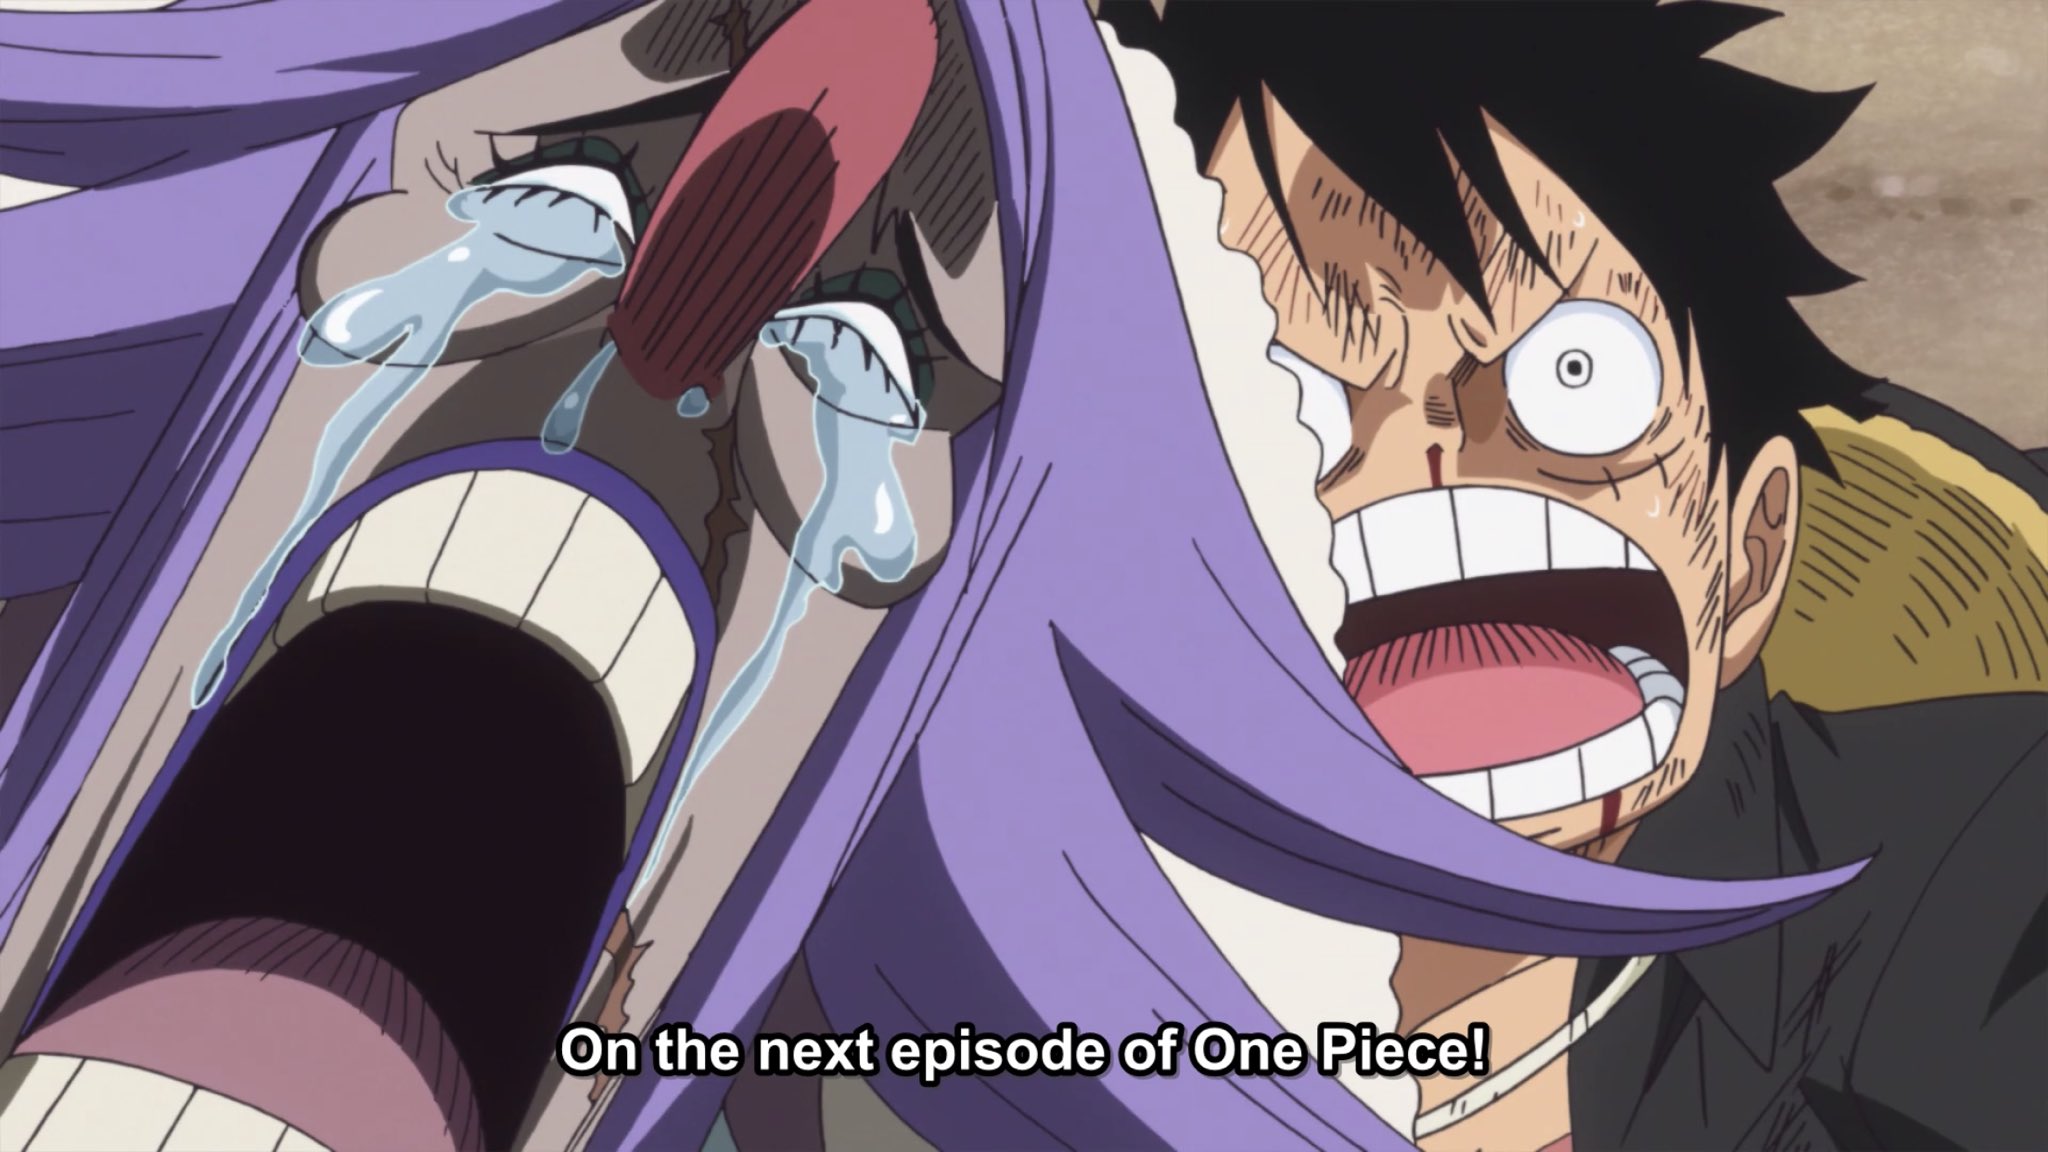 One Piece Center Pa Twitter One Piece Episode 859 The Rebellious Daughter Chiffon Sanji S Big Plan For Transporting The Cake Premiers Tonight T Co Zgwefruxoh Twitter